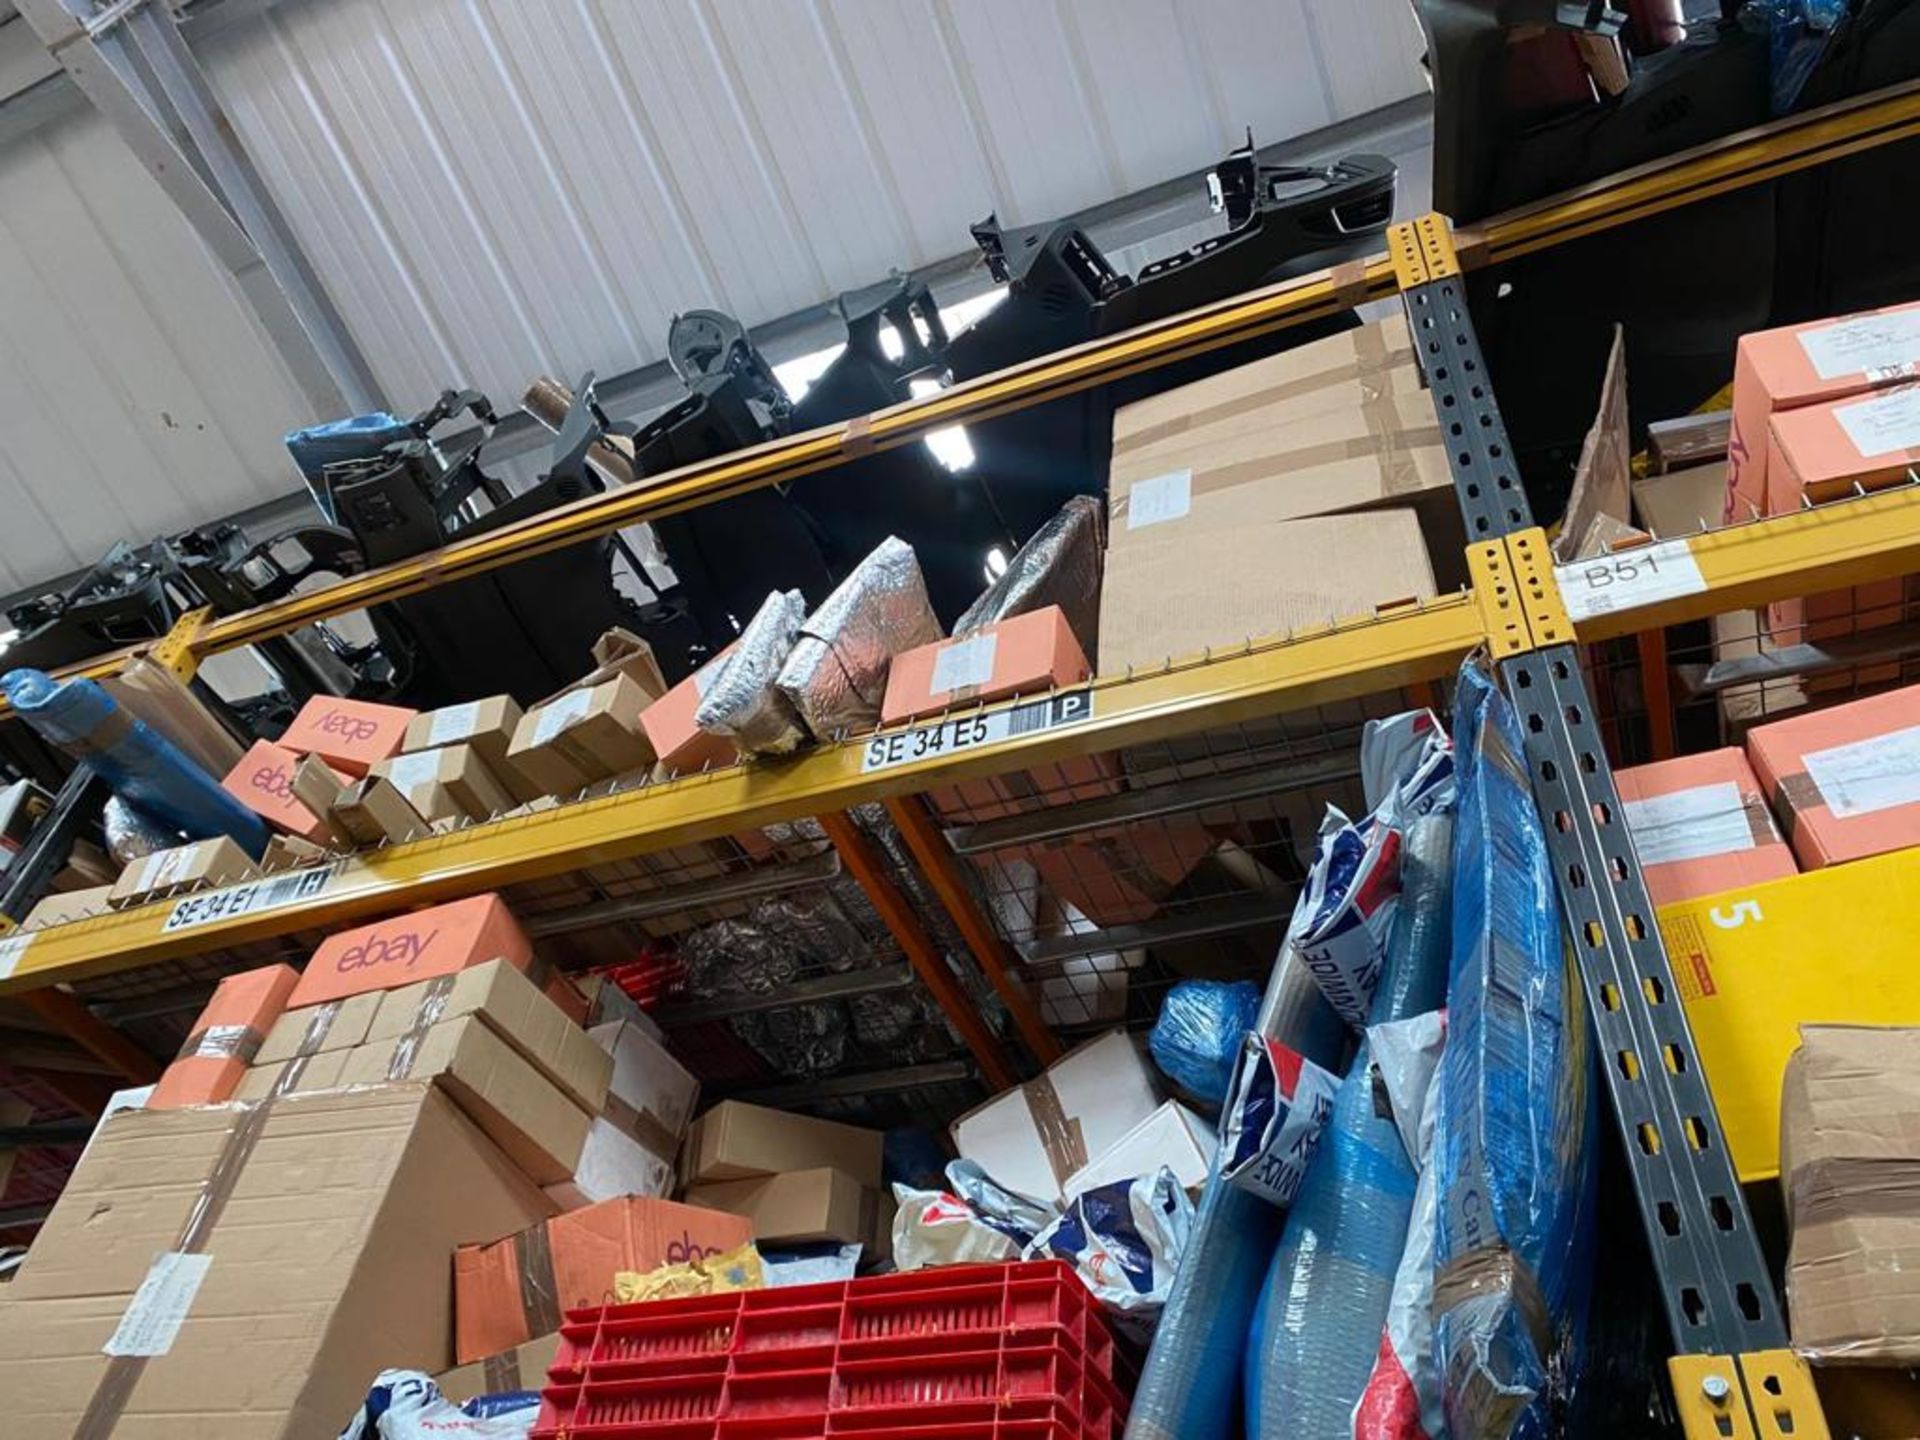 BULK ITEMS JOB LOT OF USED CAR PARTS - £350K ONGOING BUSINESS STOCK CLEARANCE FOR SALE! *NO VAT* - Image 44 of 95